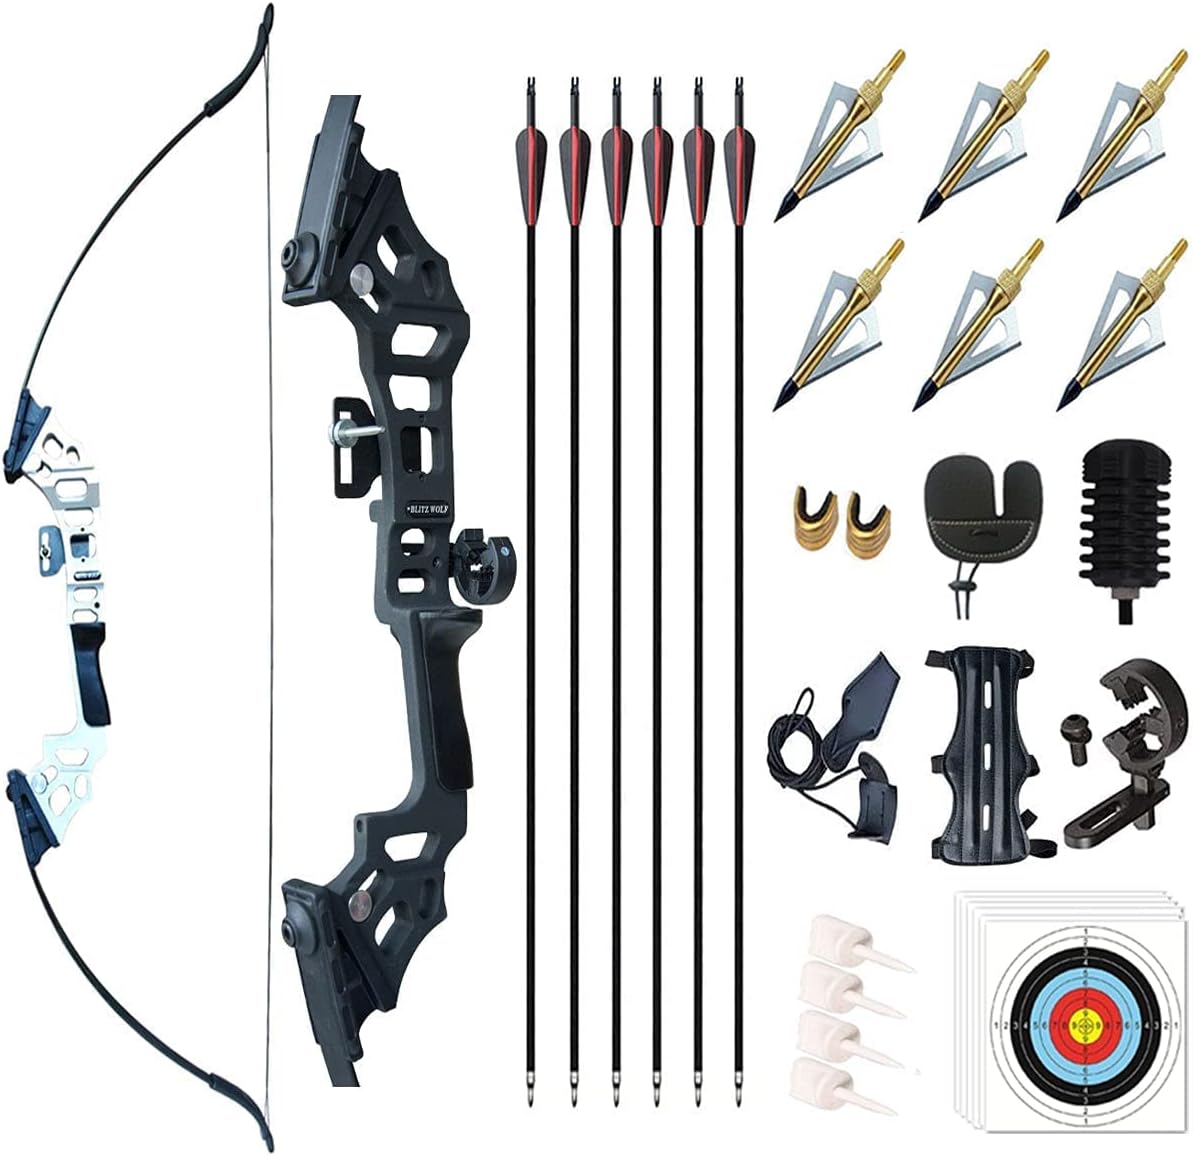 monaleap takedown recurve bow set is designed for right-handed shooters who want durability and versatility